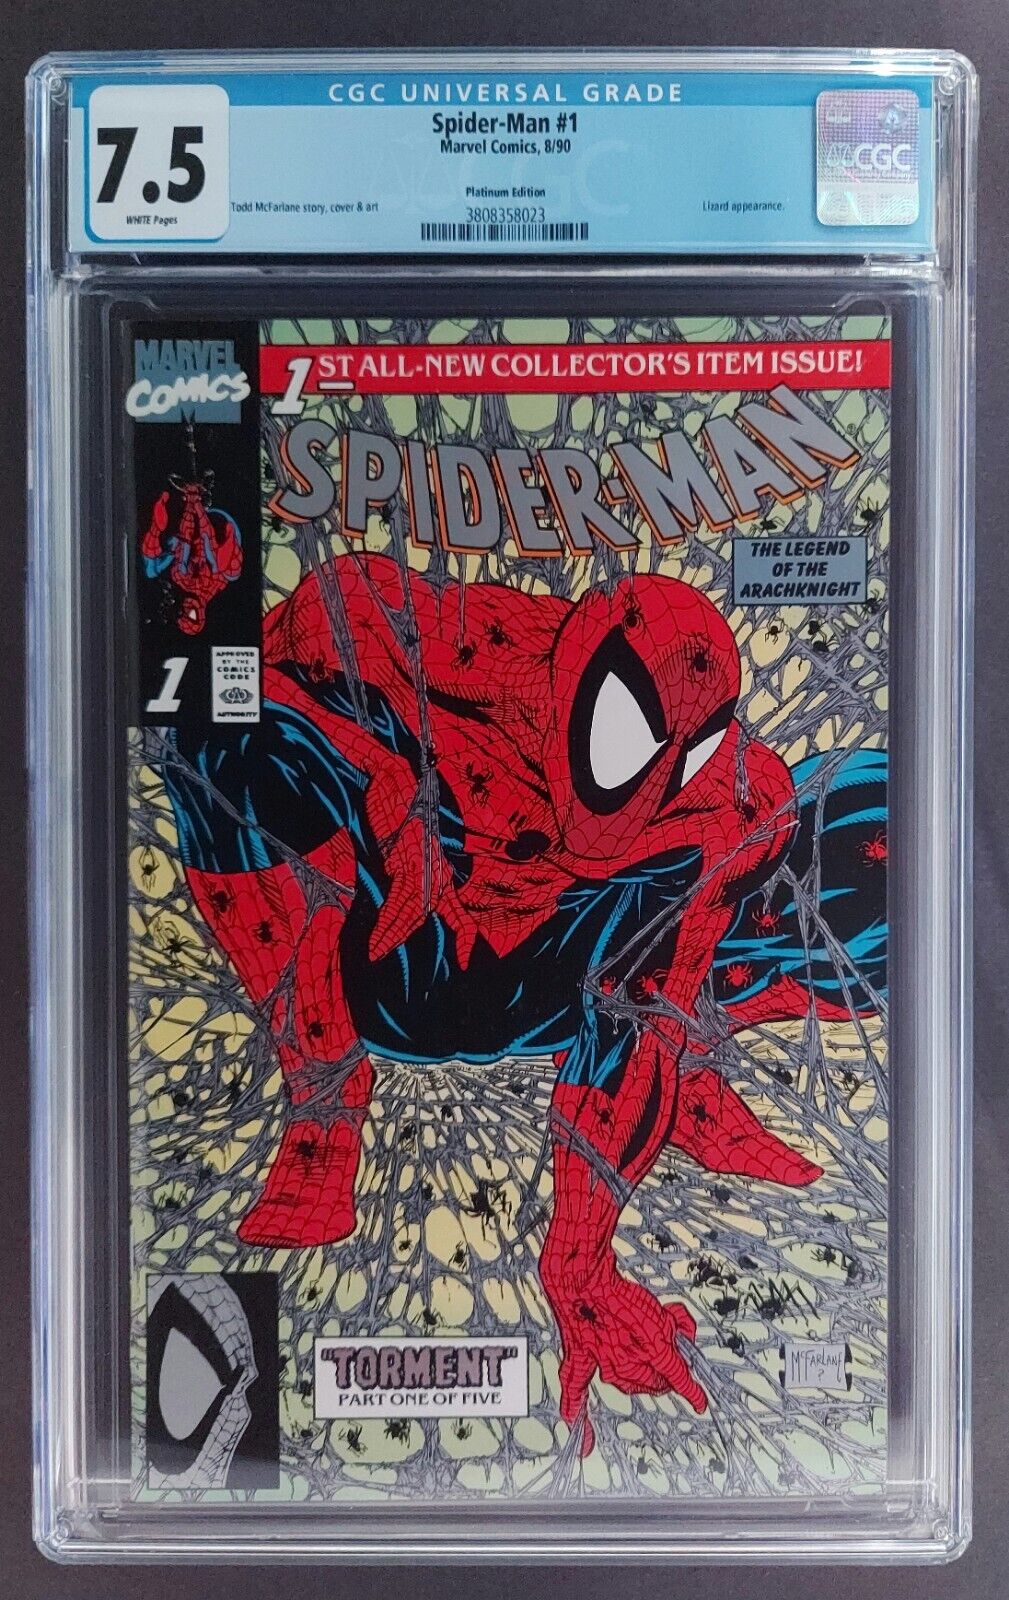 PLATINUM SPIDER-MAN # 1  CGC 7.5  WITH WHITE PAGES